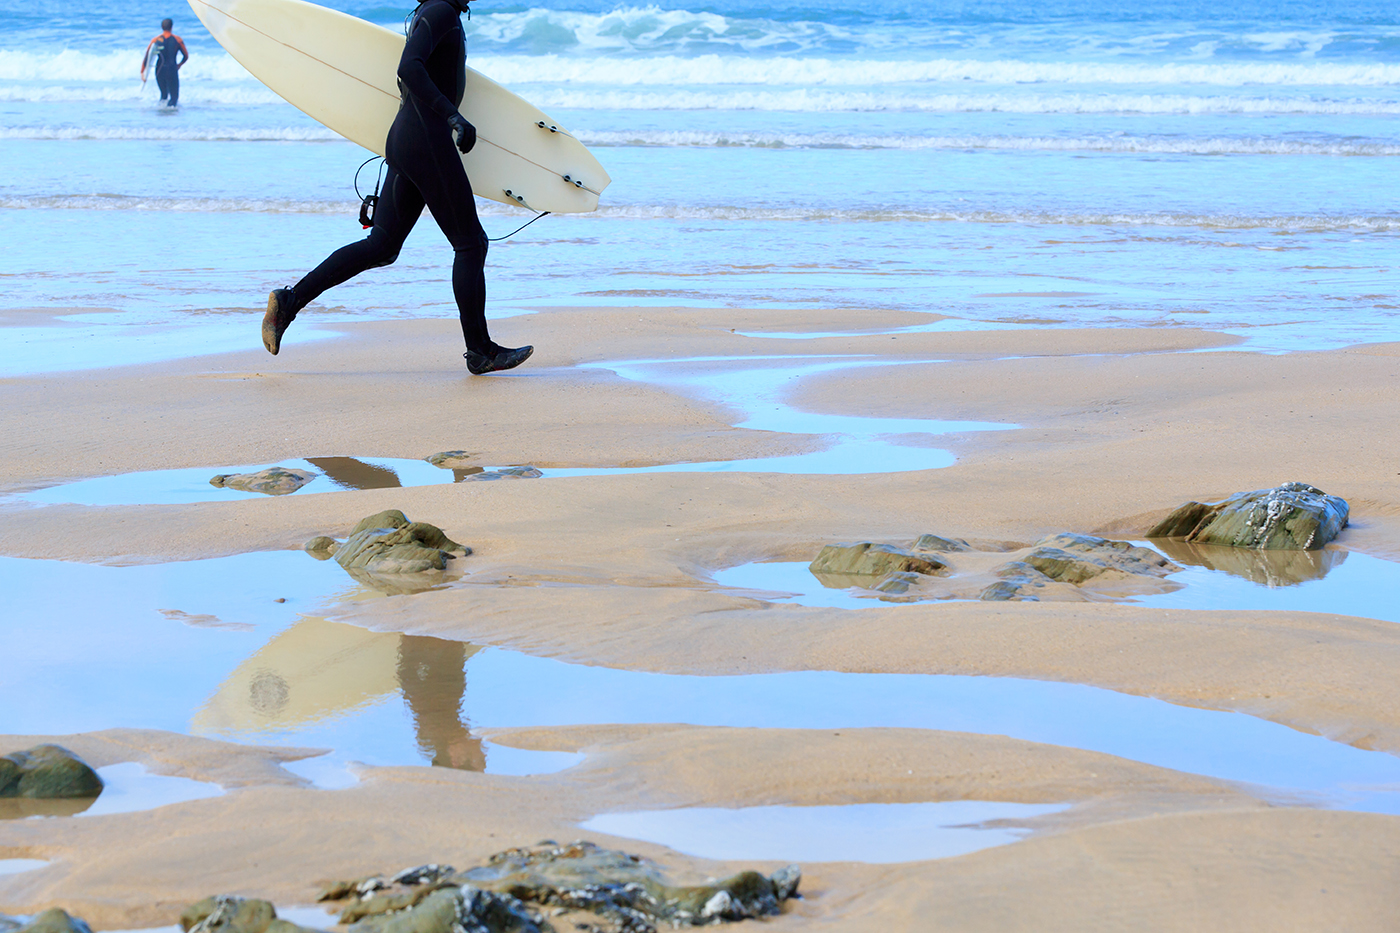 Surfing on Fistral Beach, Newquay